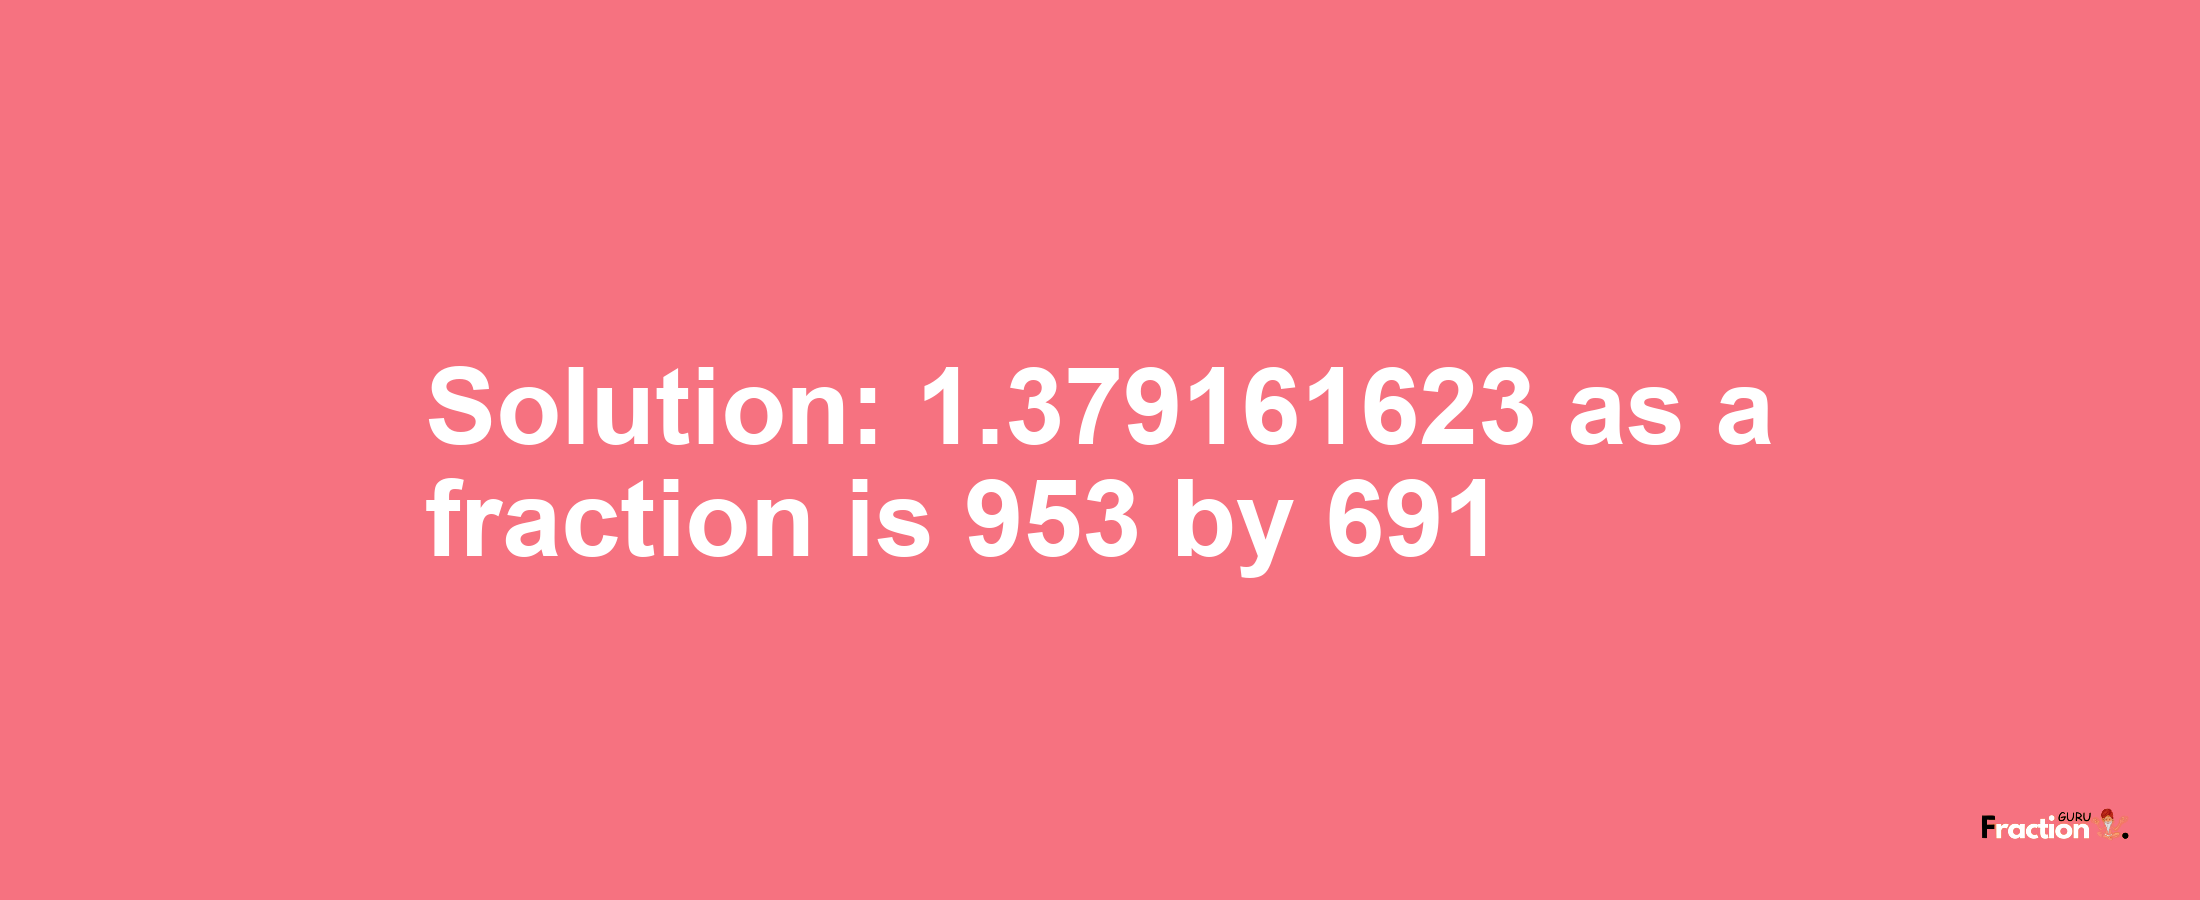 Solution:1.379161623 as a fraction is 953/691